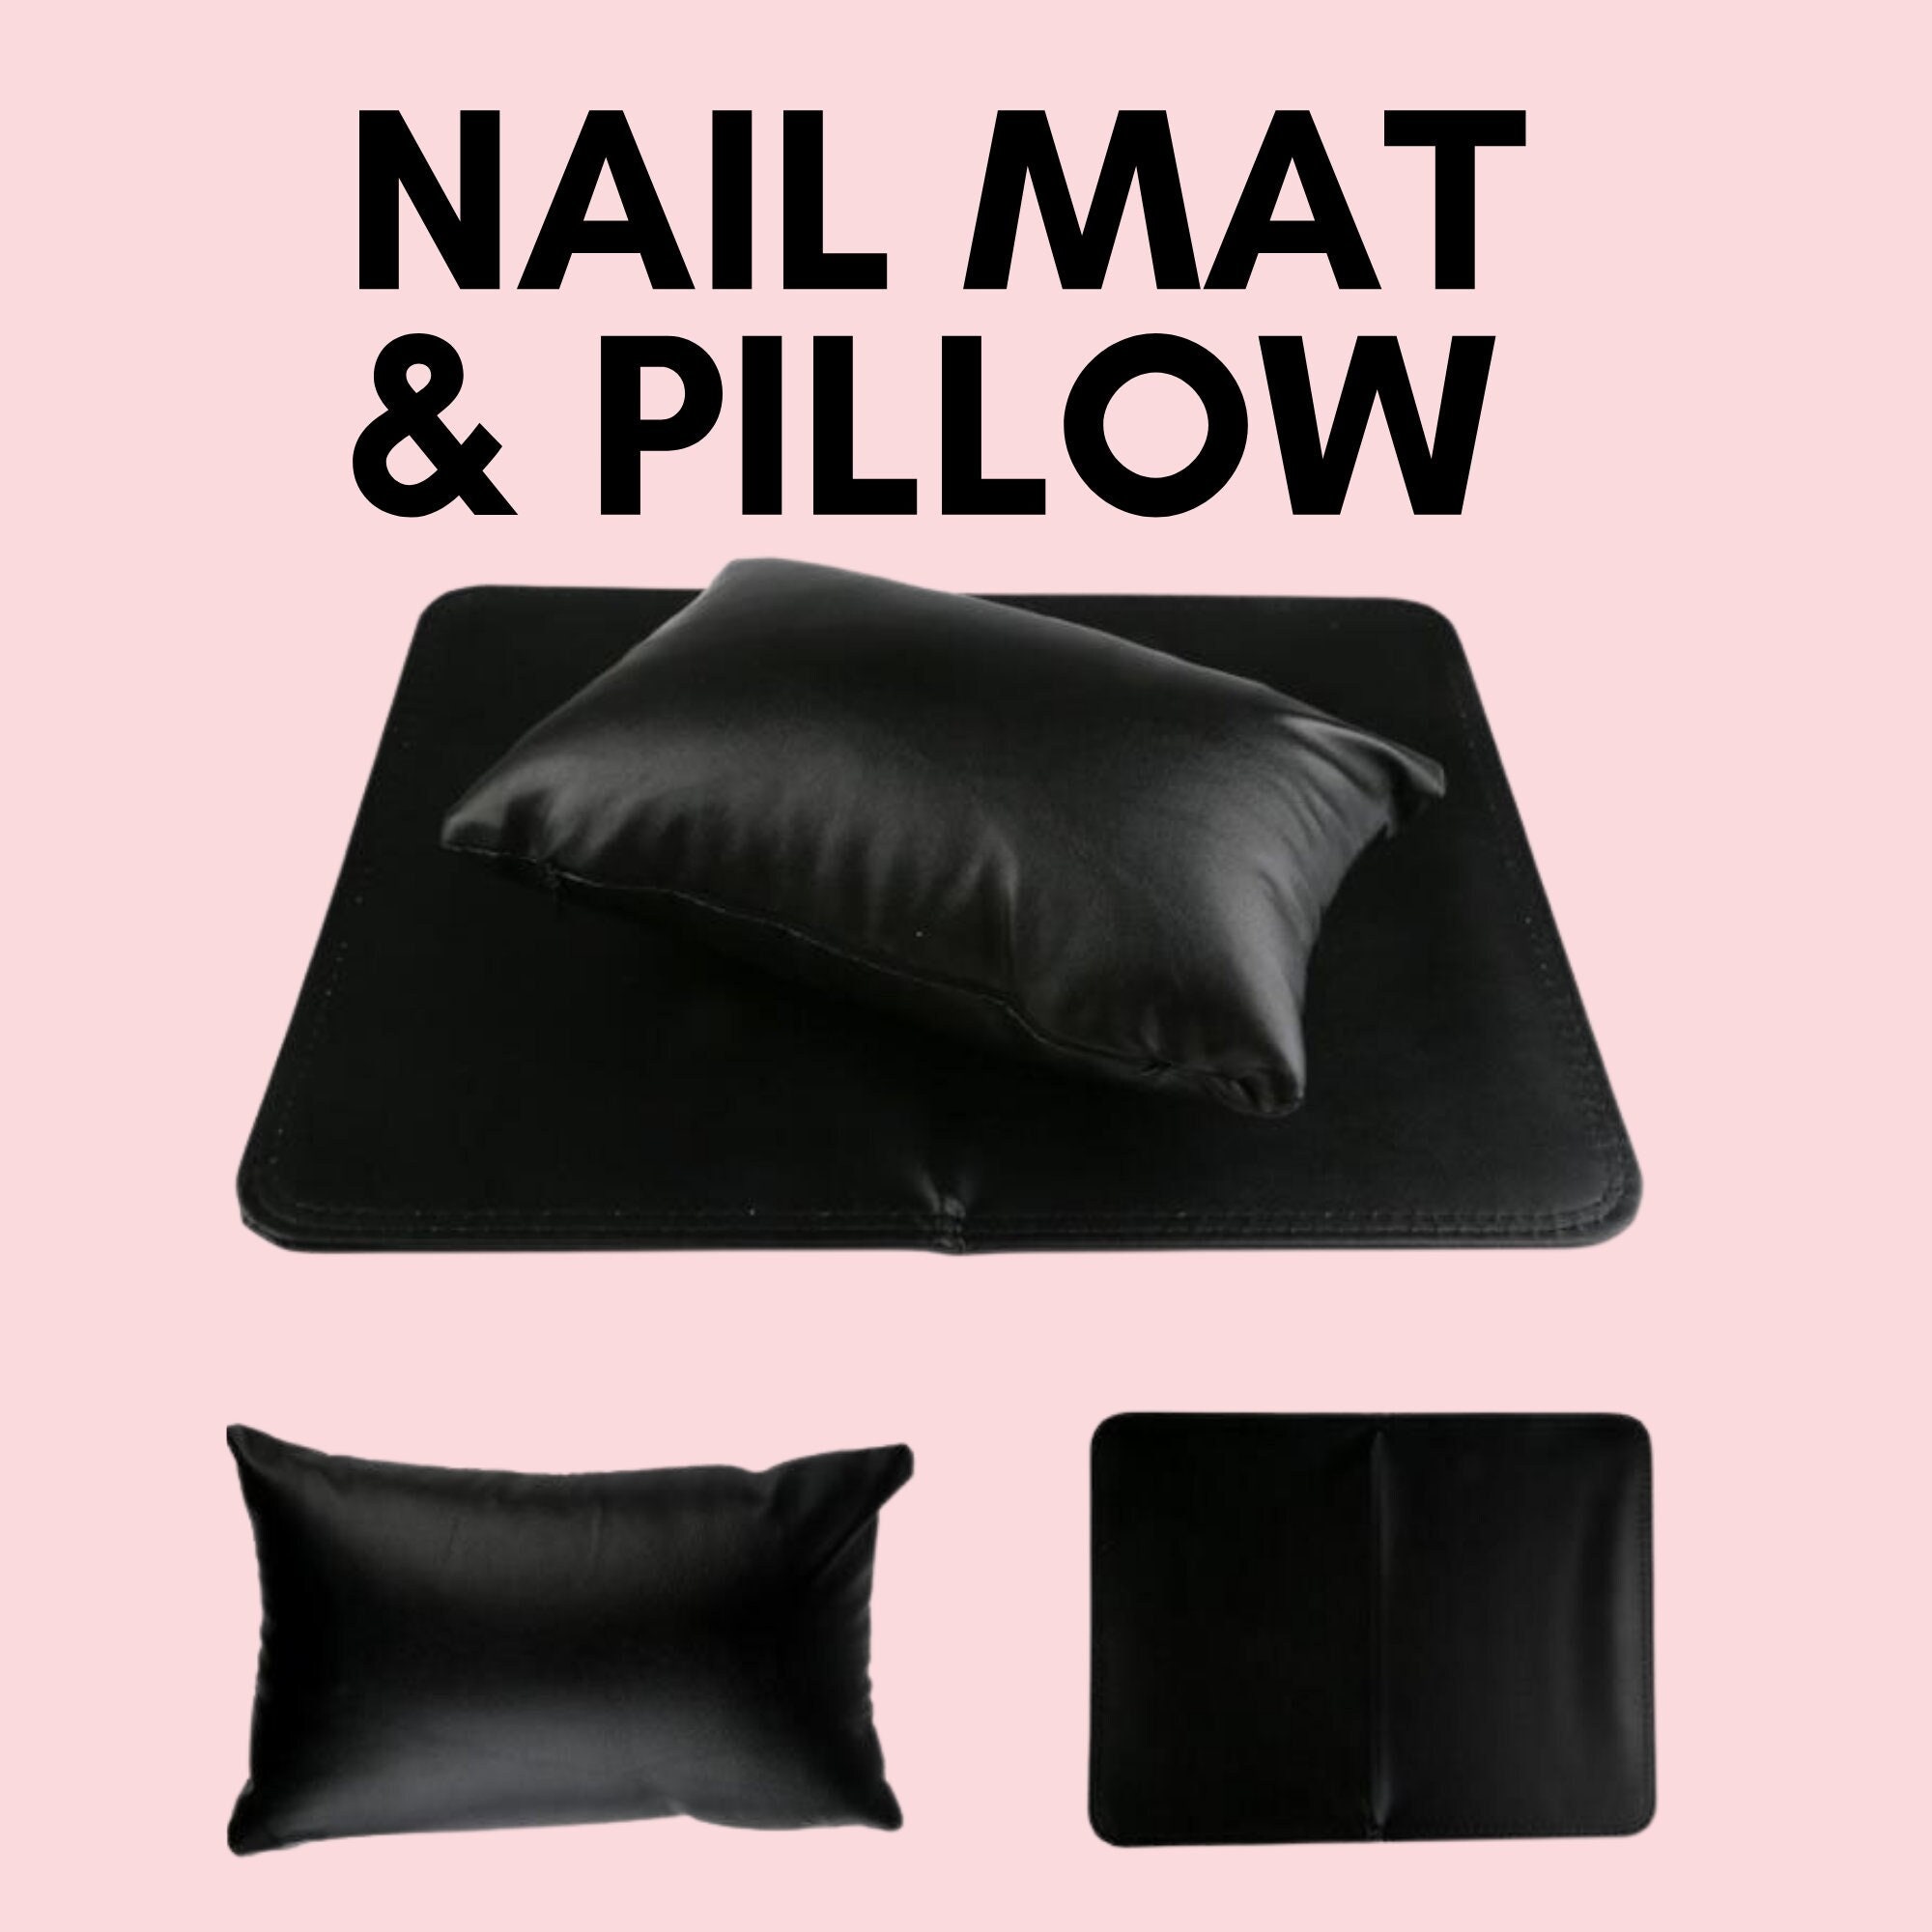 Manicure Hand Pillow&mat Set/silicone Washable Manicure Table Mat With  Matching Pillow/diy Nail Tool 